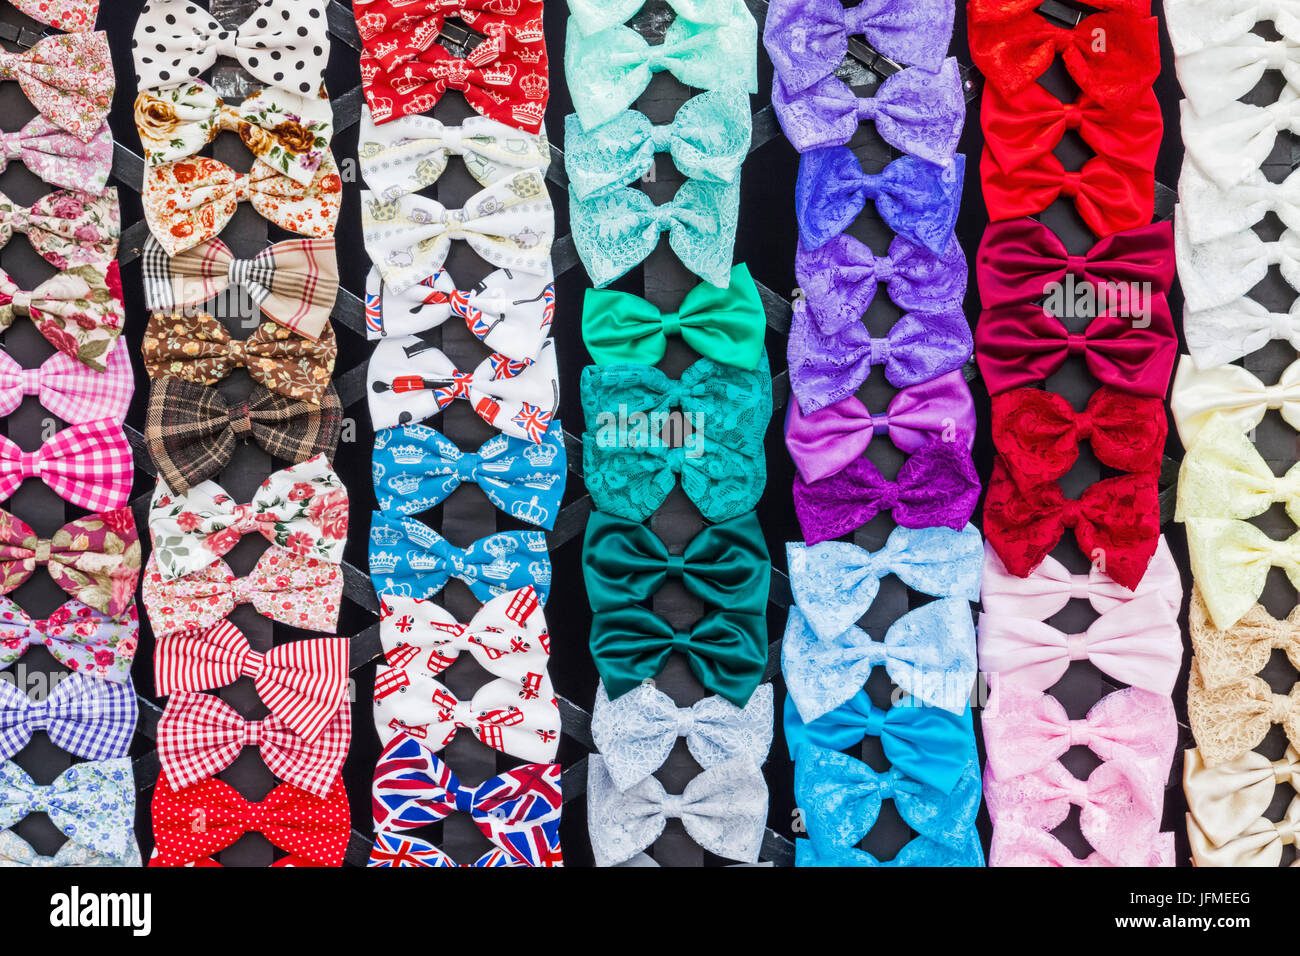 England, London, Greenwich, Greenwich Market, Antique Stall Display of Colourful Bow Ties Stock Photo